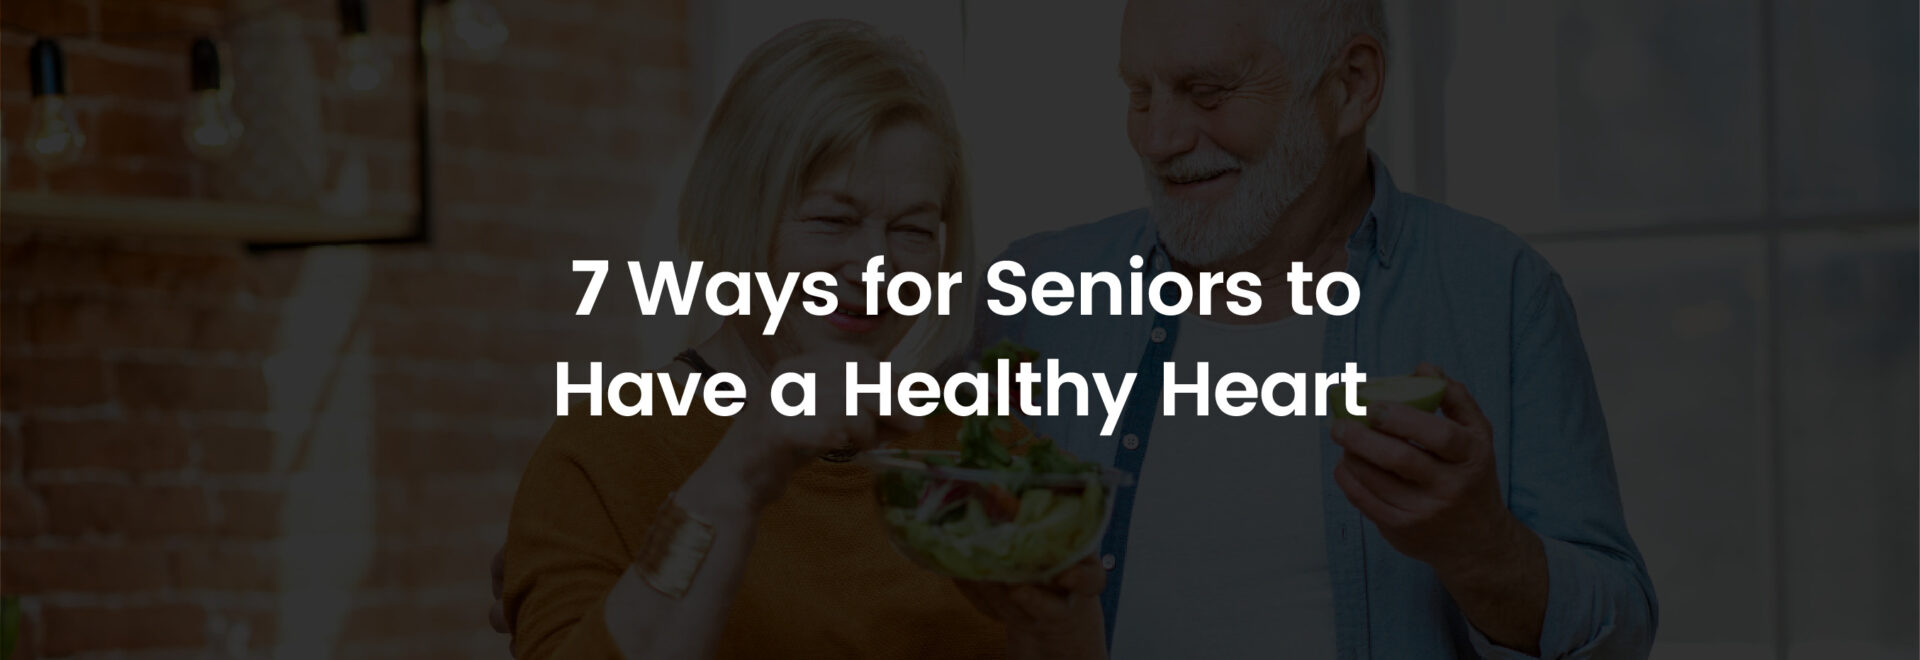 7 Ways for Seniors to Have a Healthy Heart | Banner Image